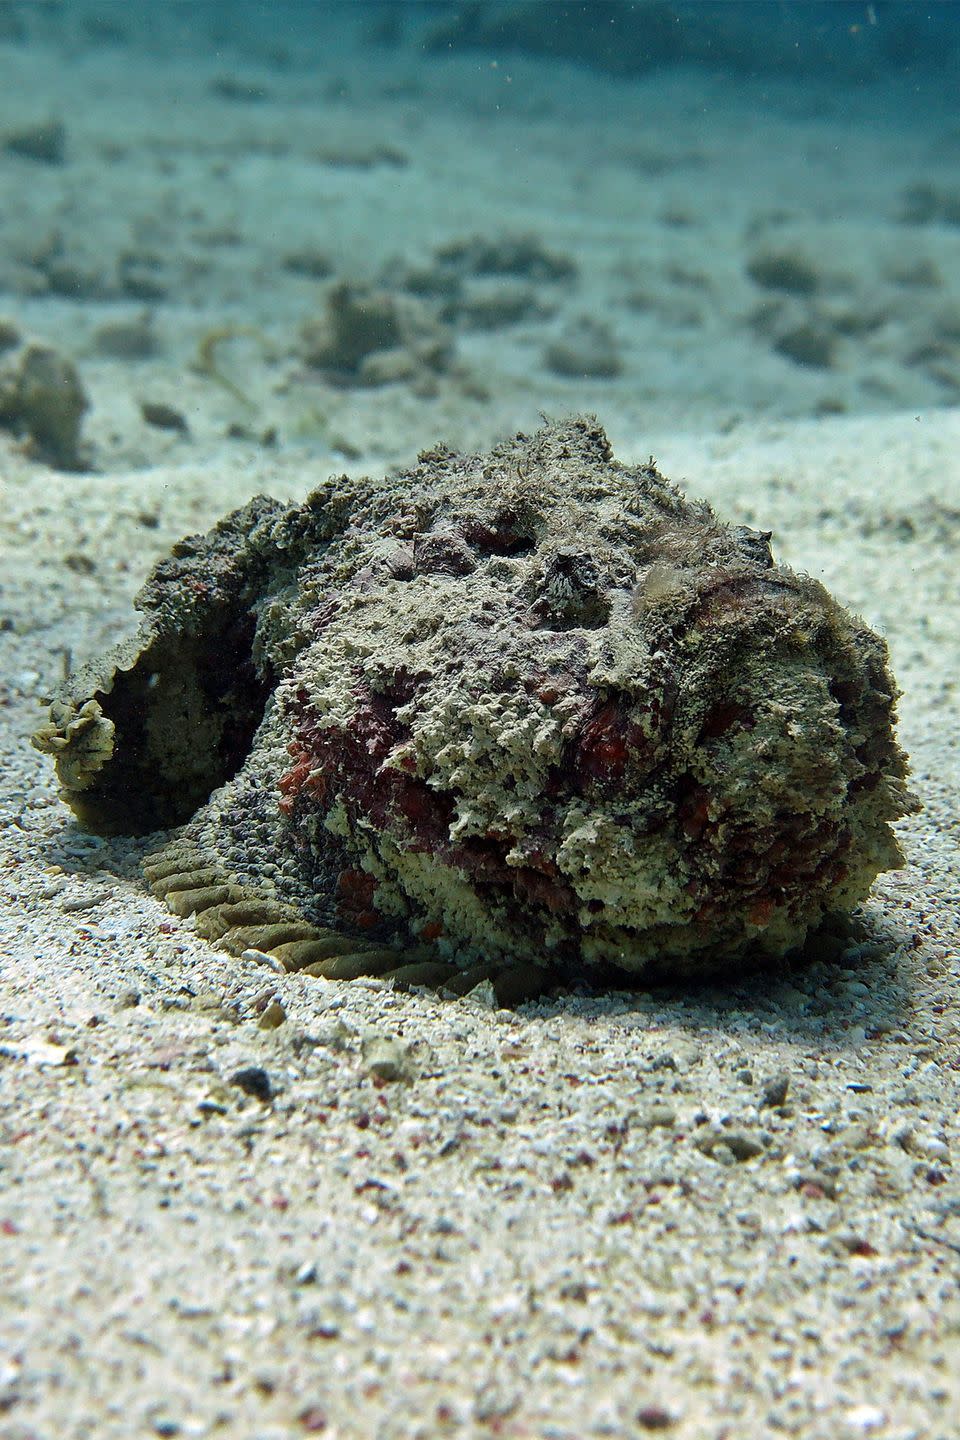 5. Stonefish are the most poisonous fish in the world.